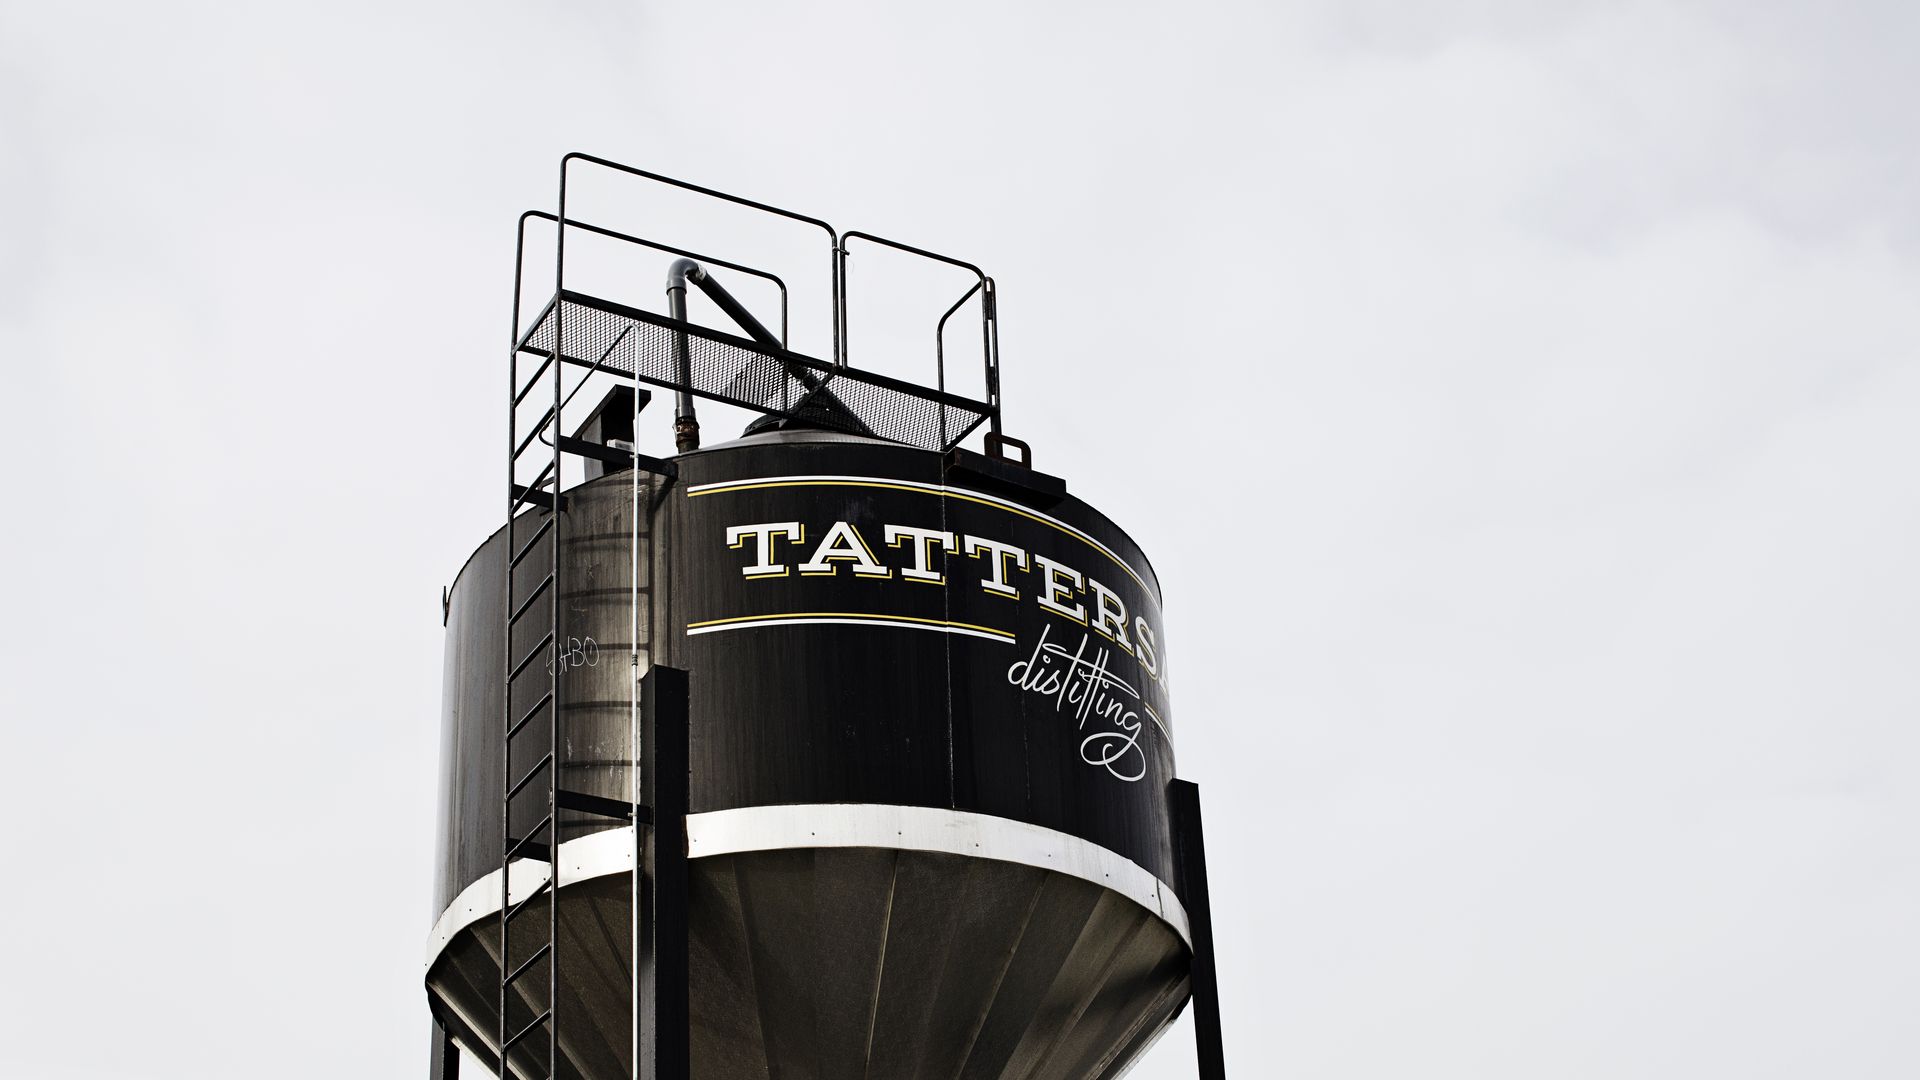 large drum on top of building with tattersall distilling written on side